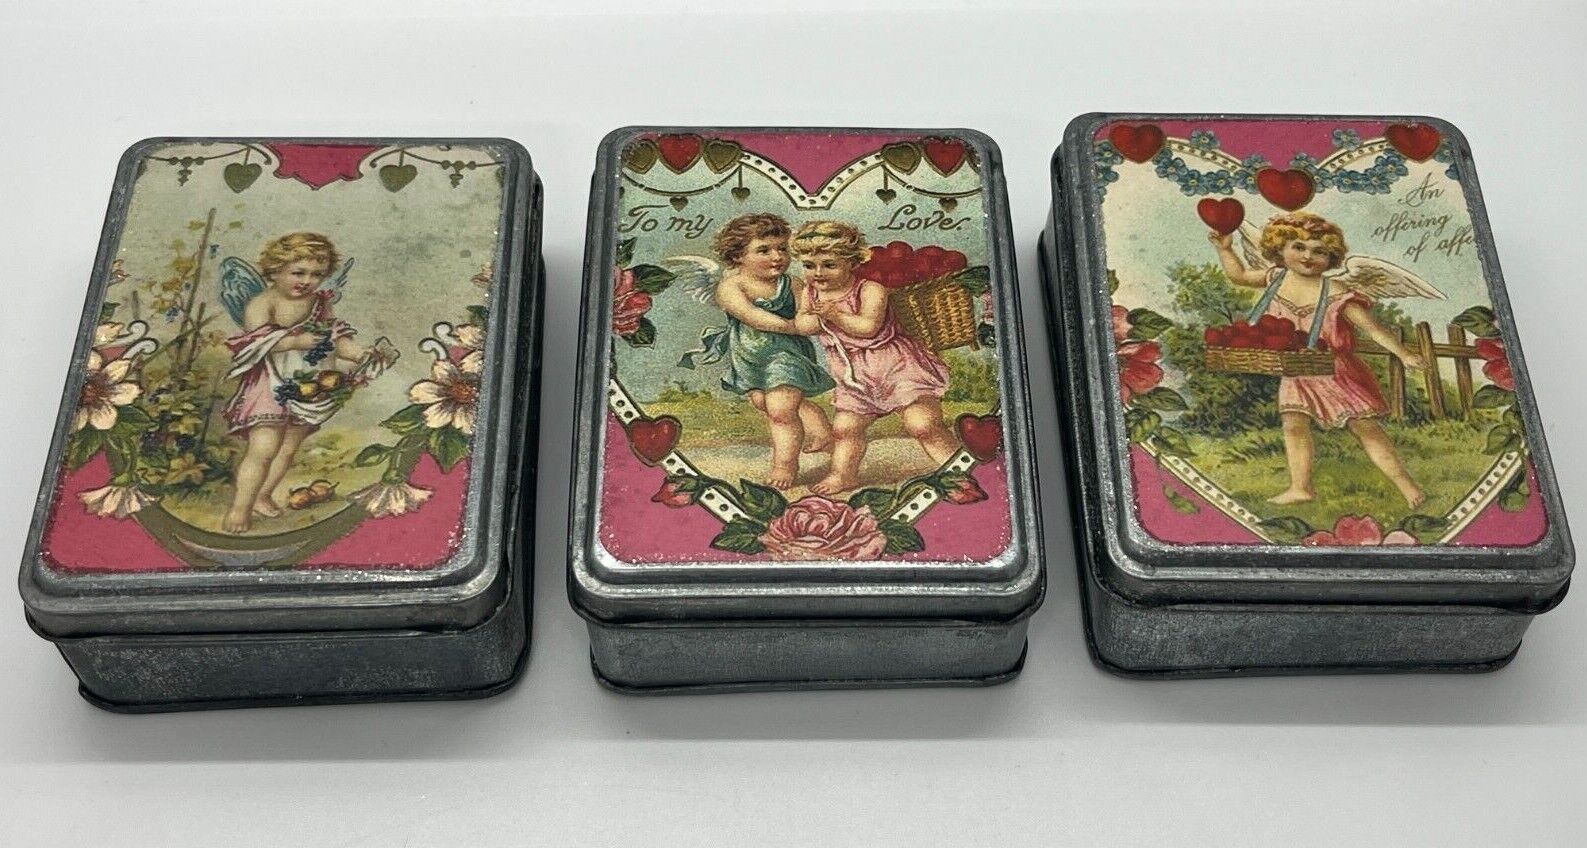 3 Small Angel Metal Tin Boxes with 3 different beautiful designs 4.25x3.25x1.5\